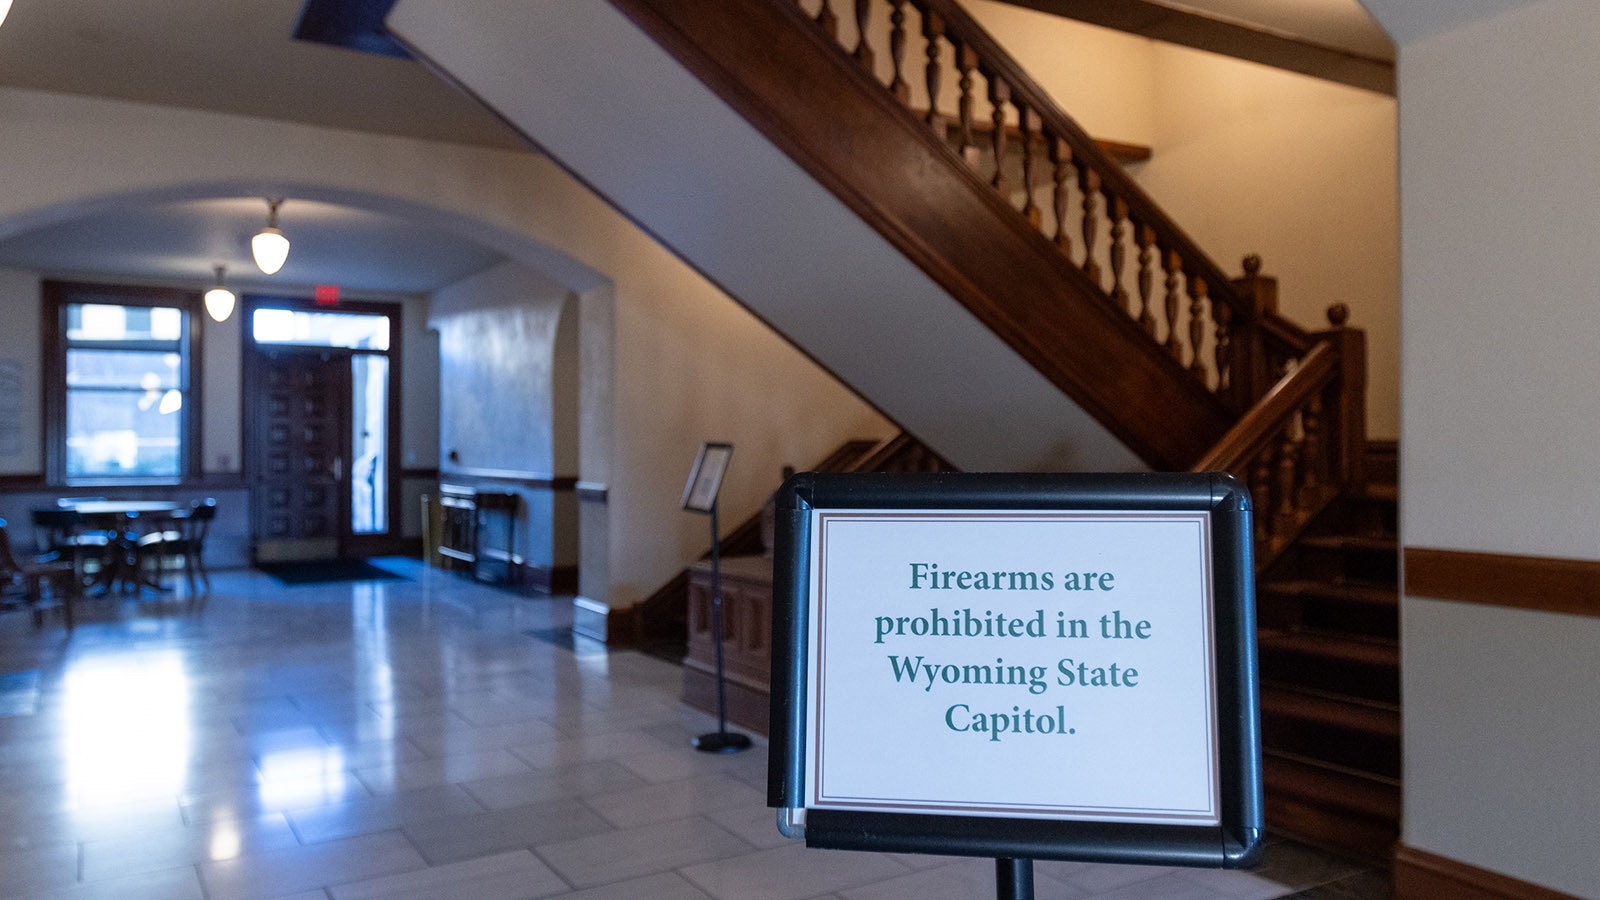 The Wyoming Capitol in Cheyenne is a gun-free zone, but a bill is moving through the Legislature that could lift the designation for many public places.